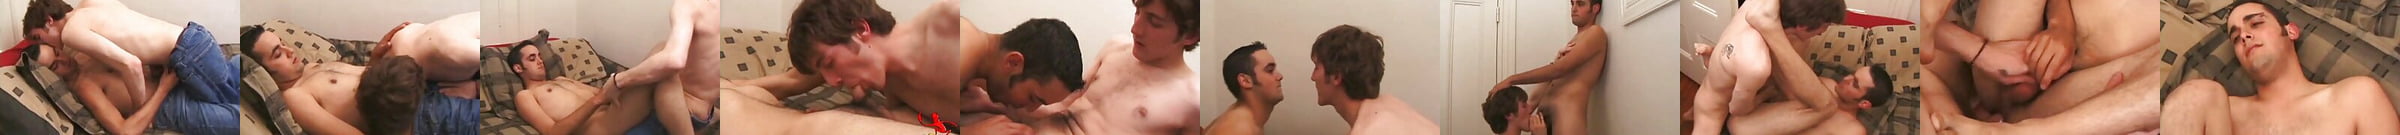 Featured Amateur Gay Porn Videos 113 Xhamster